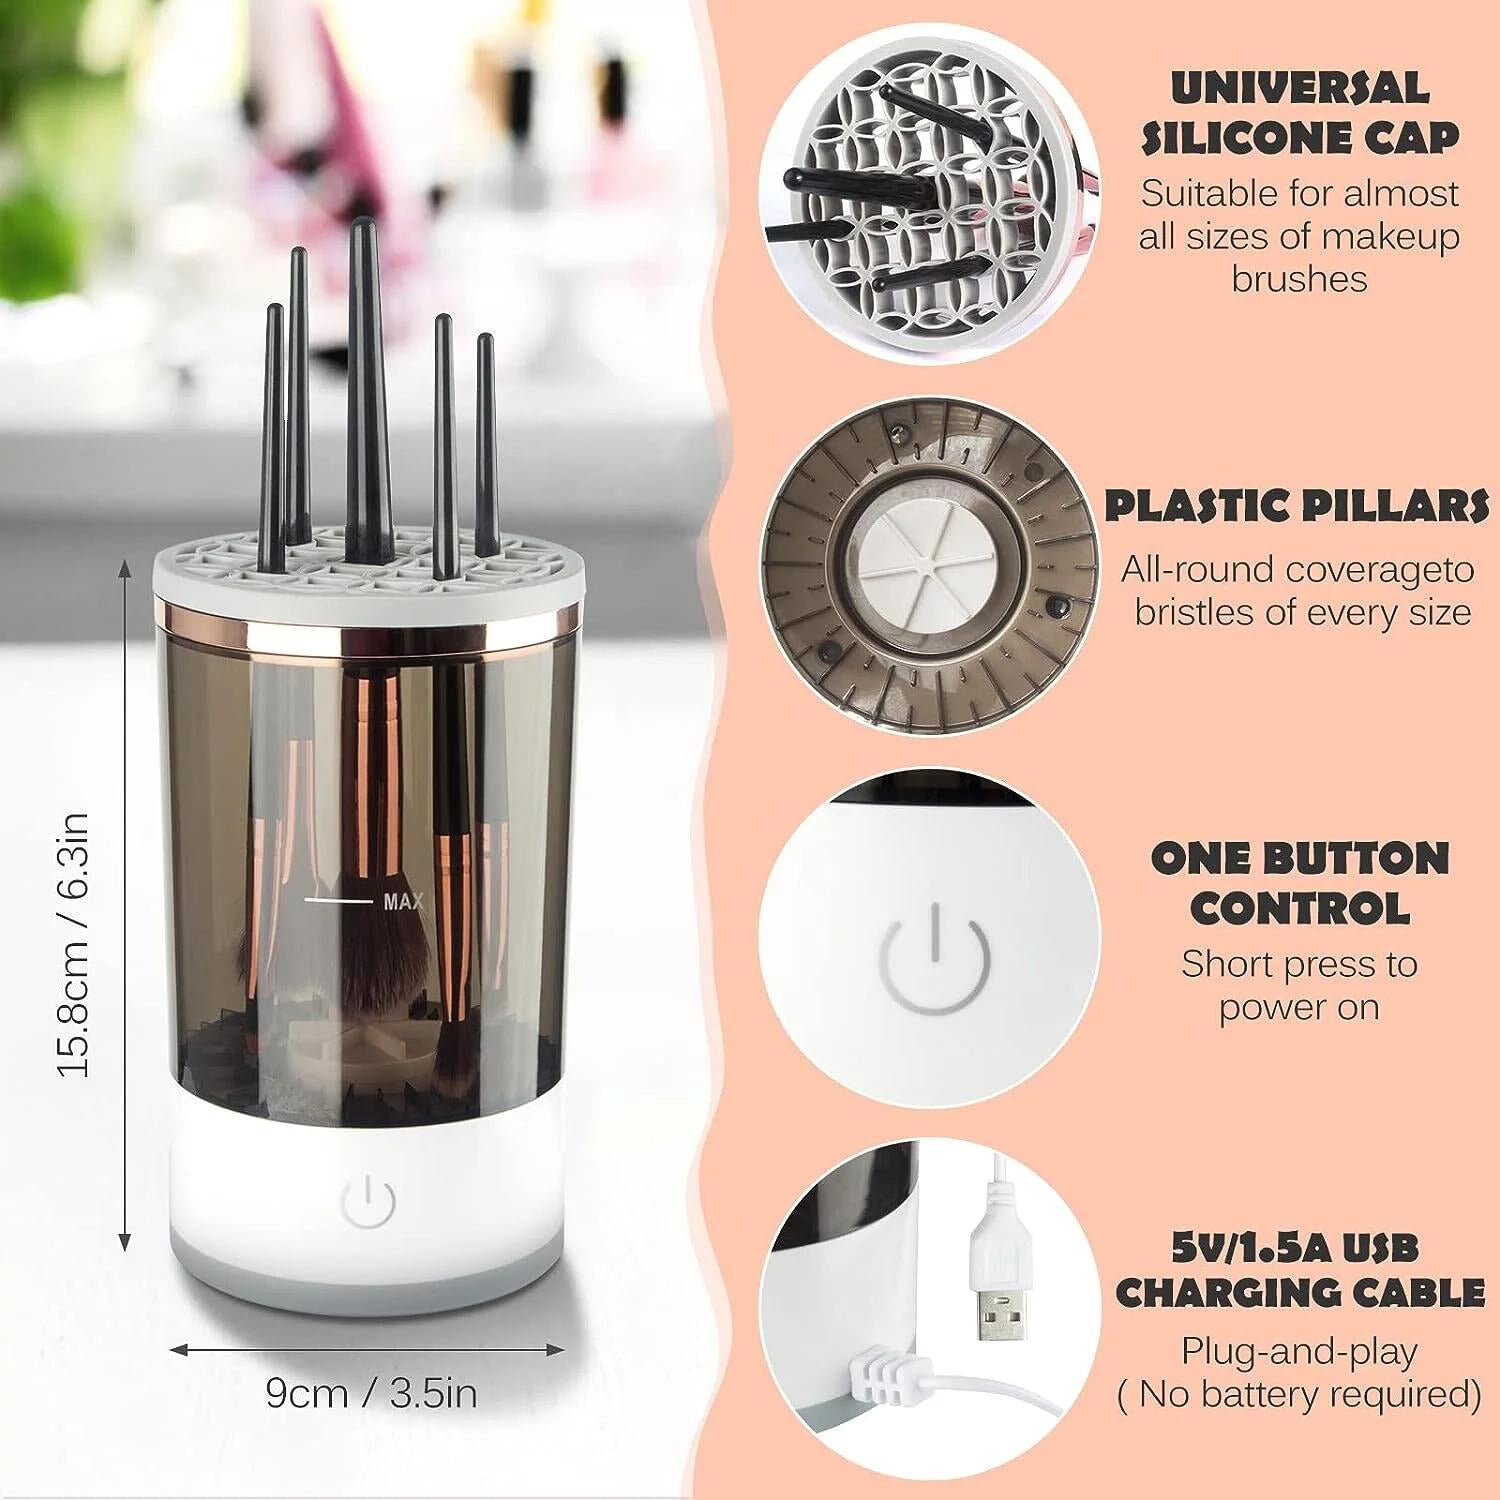 Automatic Makeup Brush Rinser – Innovation